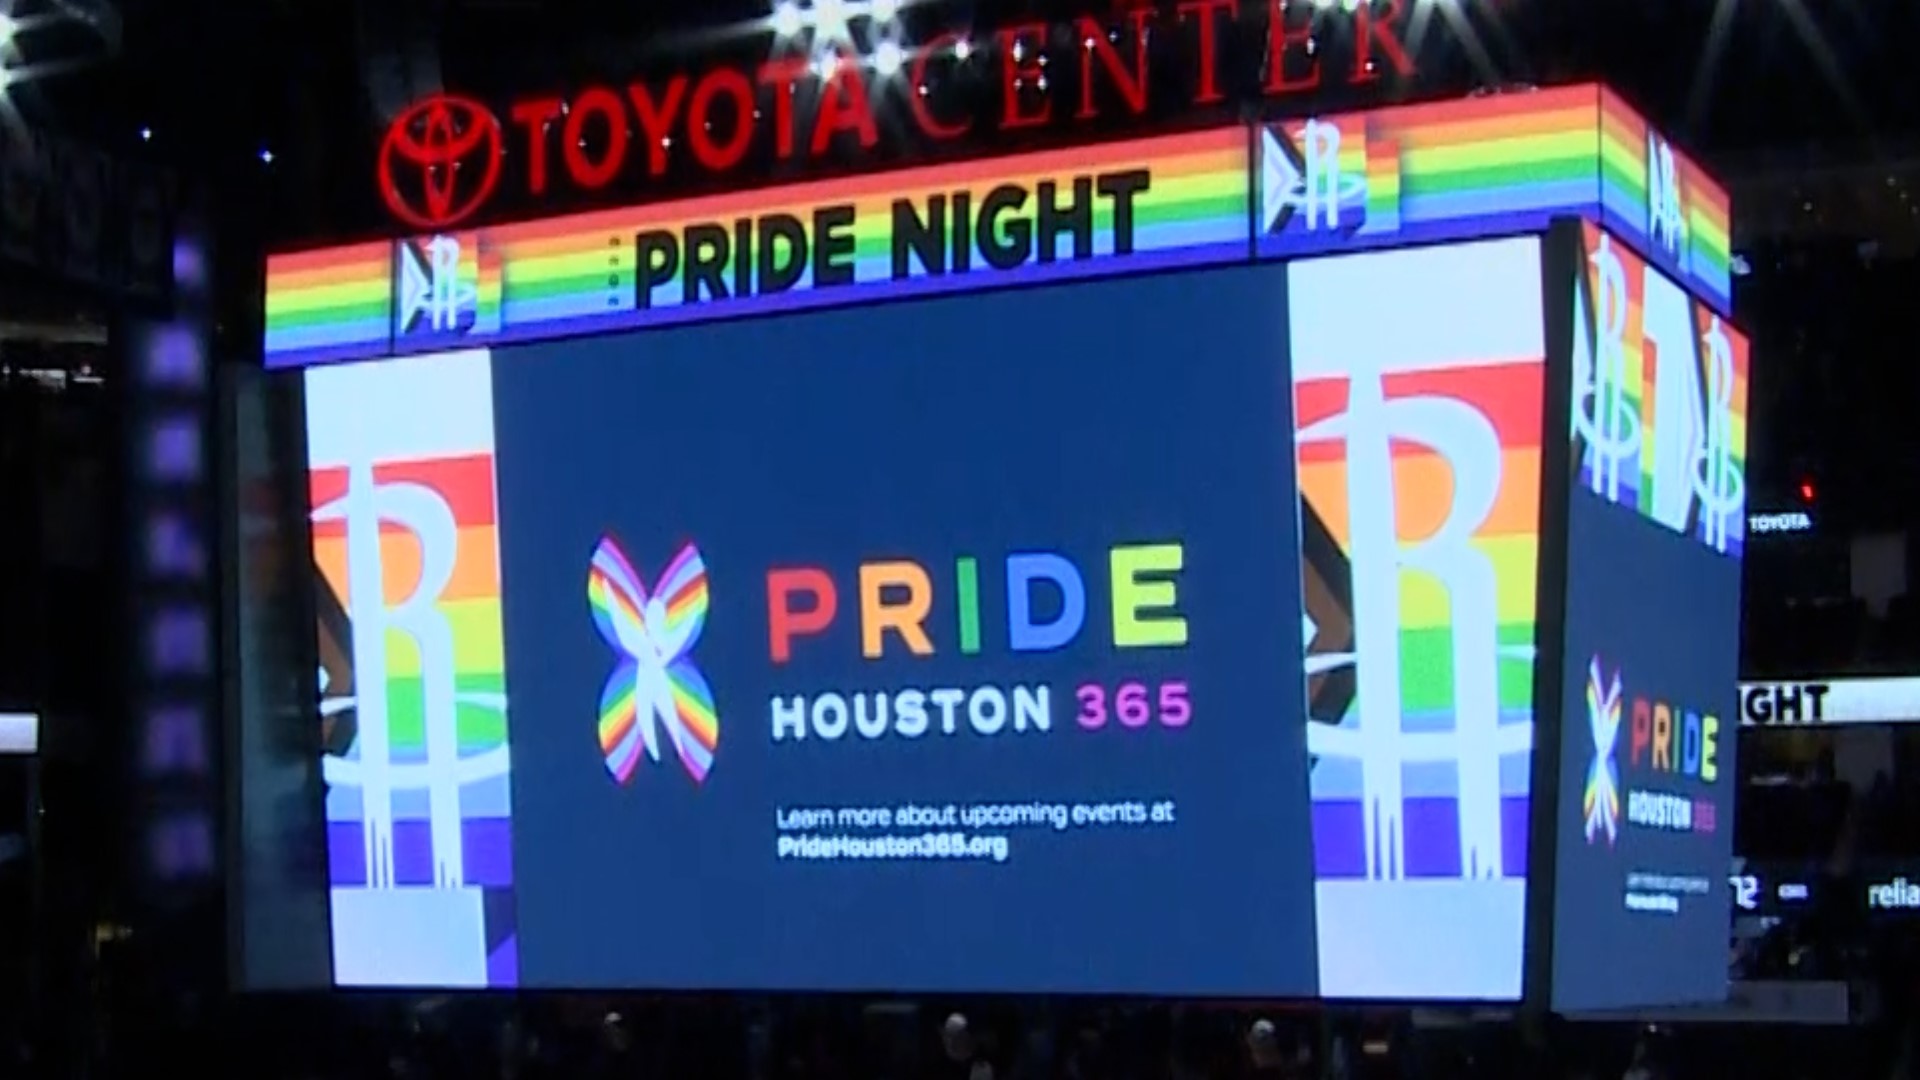 Pride Houston partnered with the Houston Rockets Wednesday for Pride Night and made several announcements about changes to its organization.